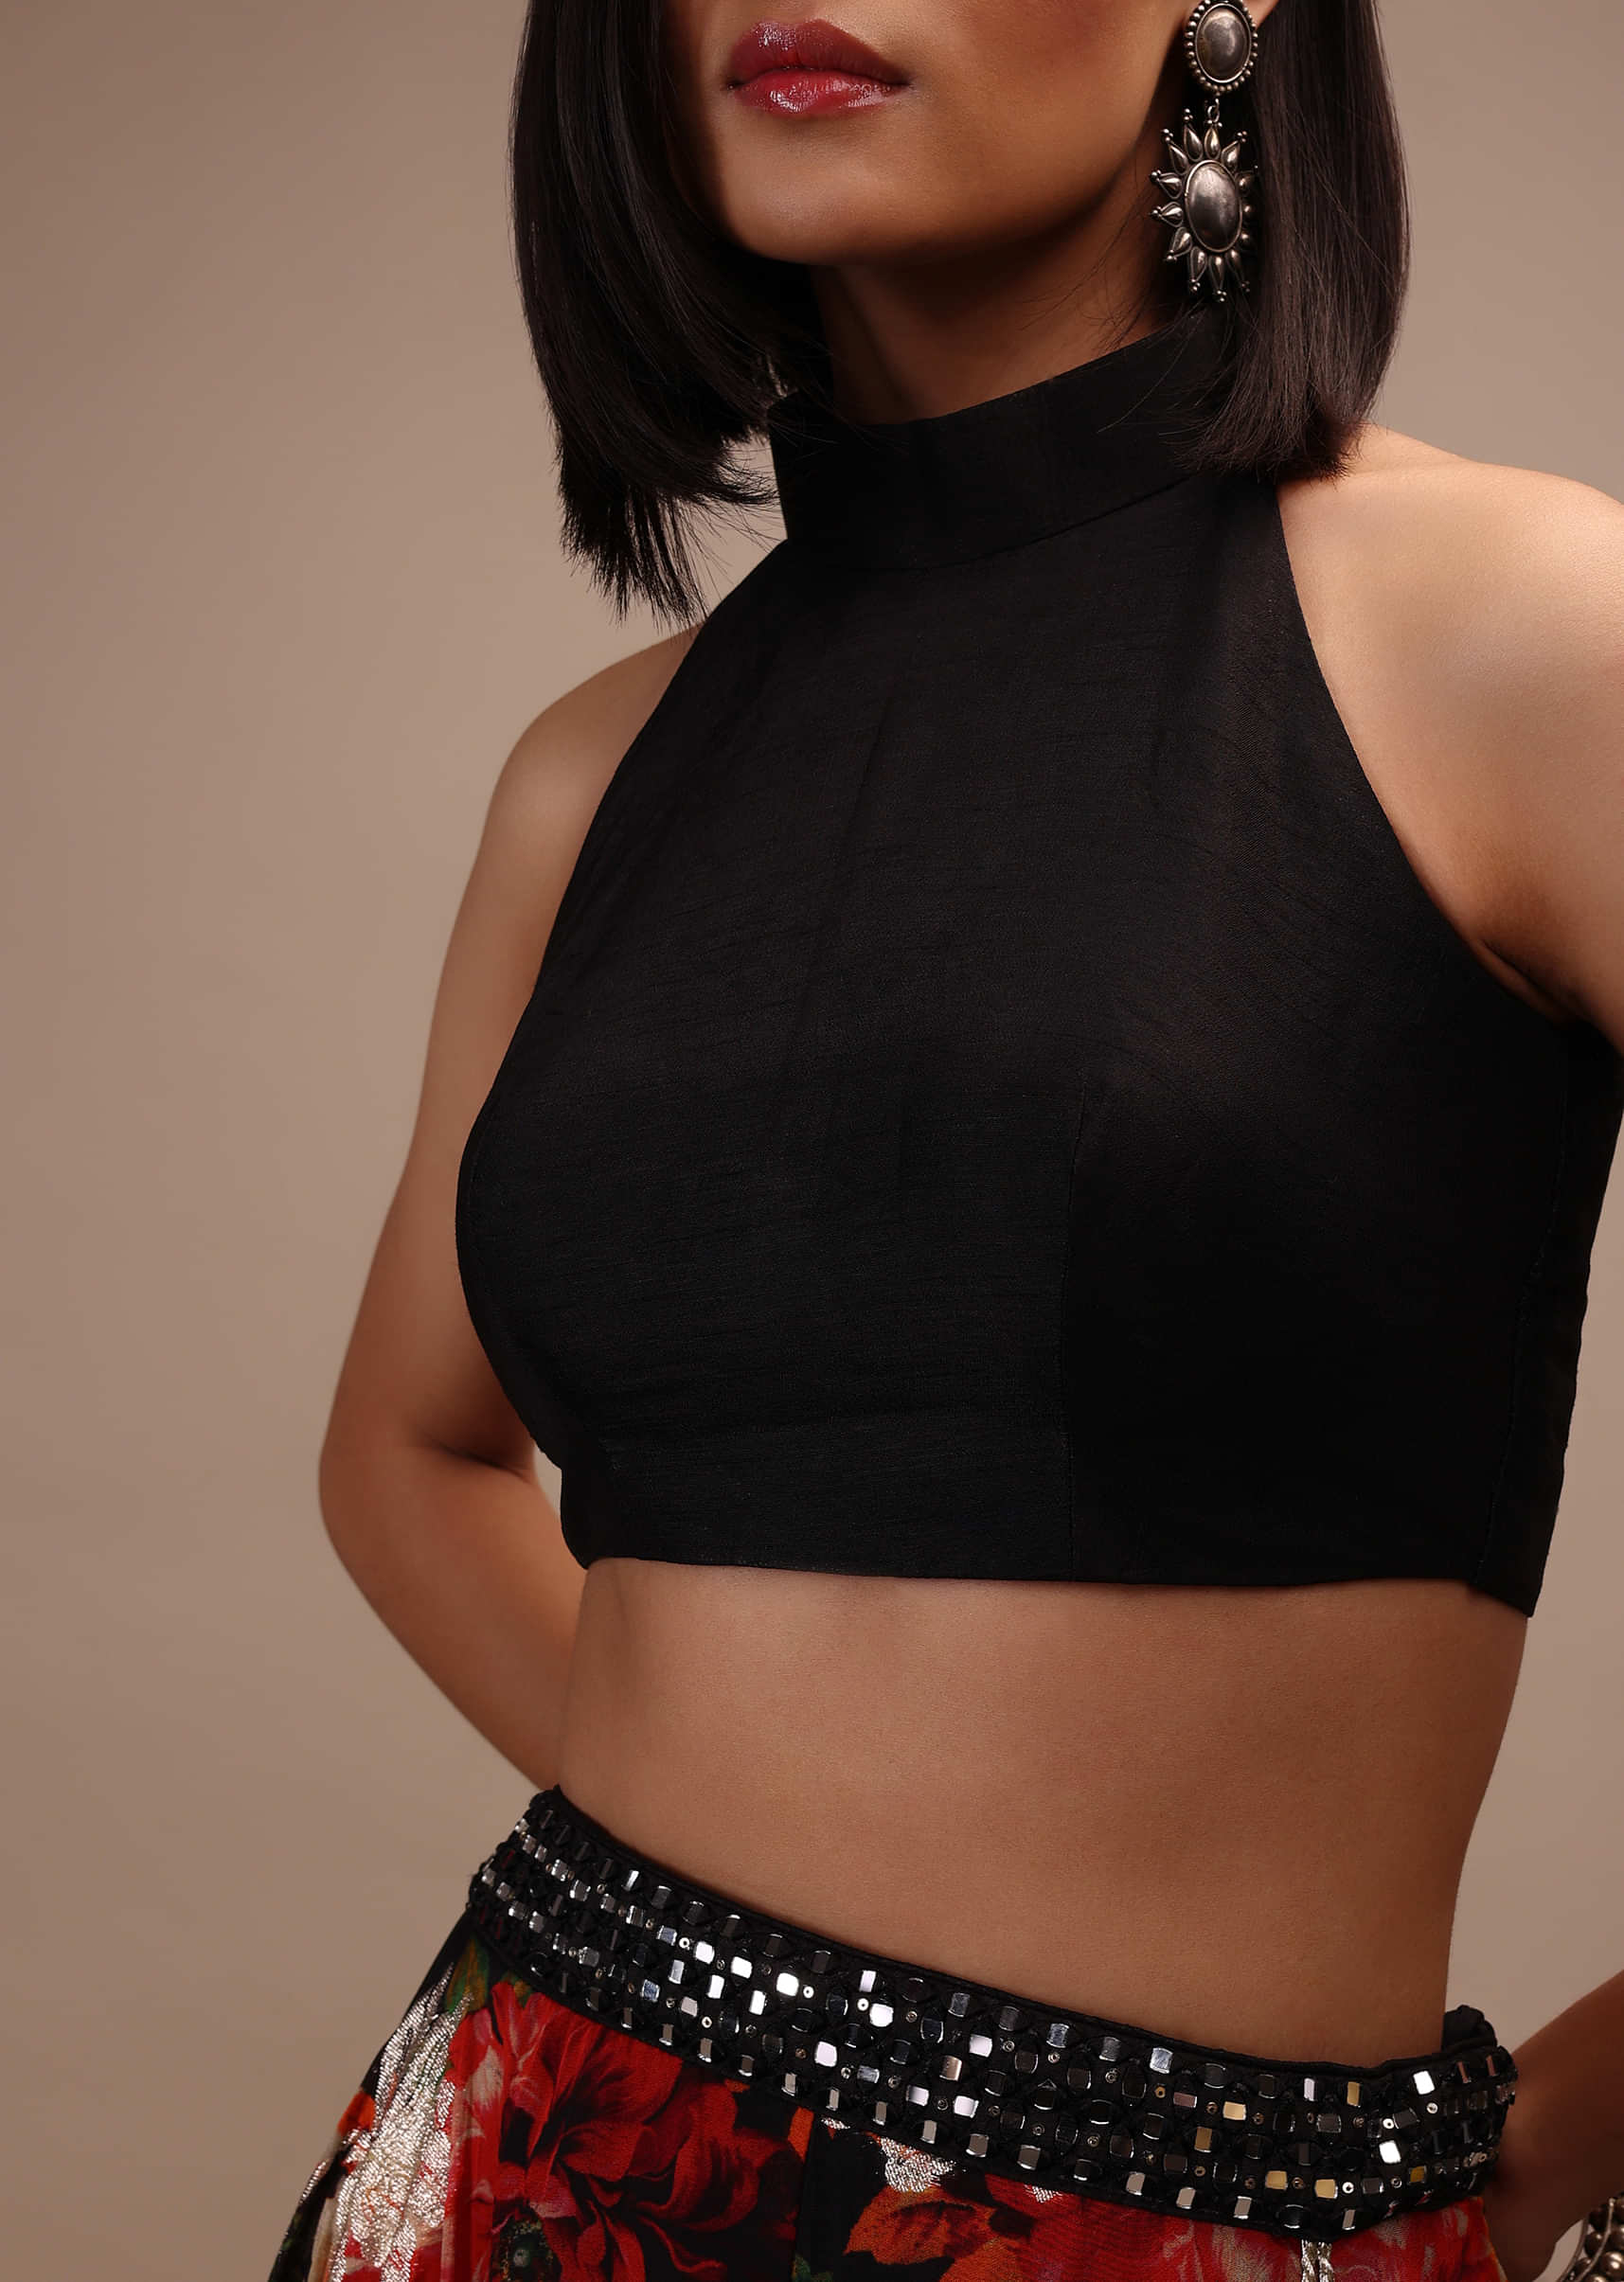 Black Sleeveless Blouse In A High Collar And A Halter Neckline Padded And Back-Zip Closure